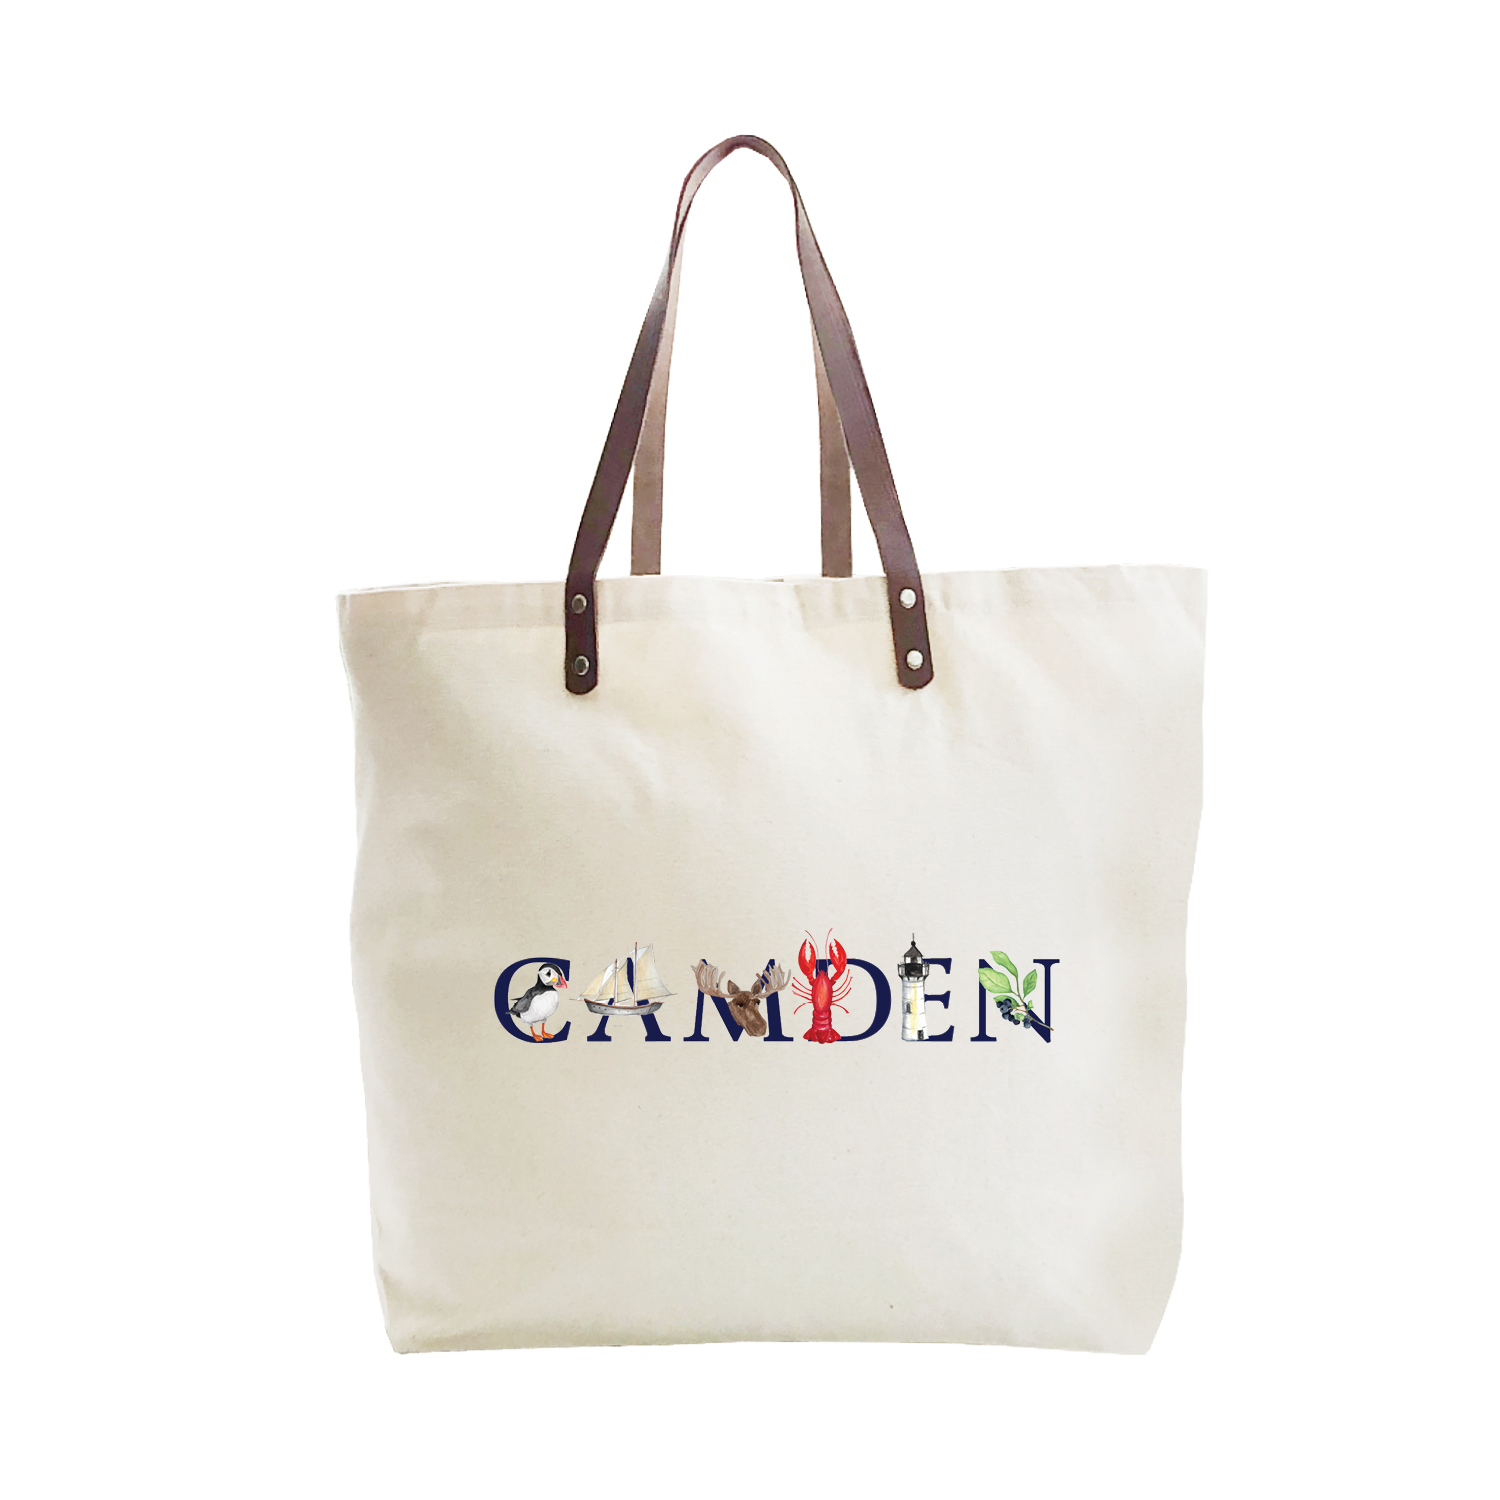 camden large tote